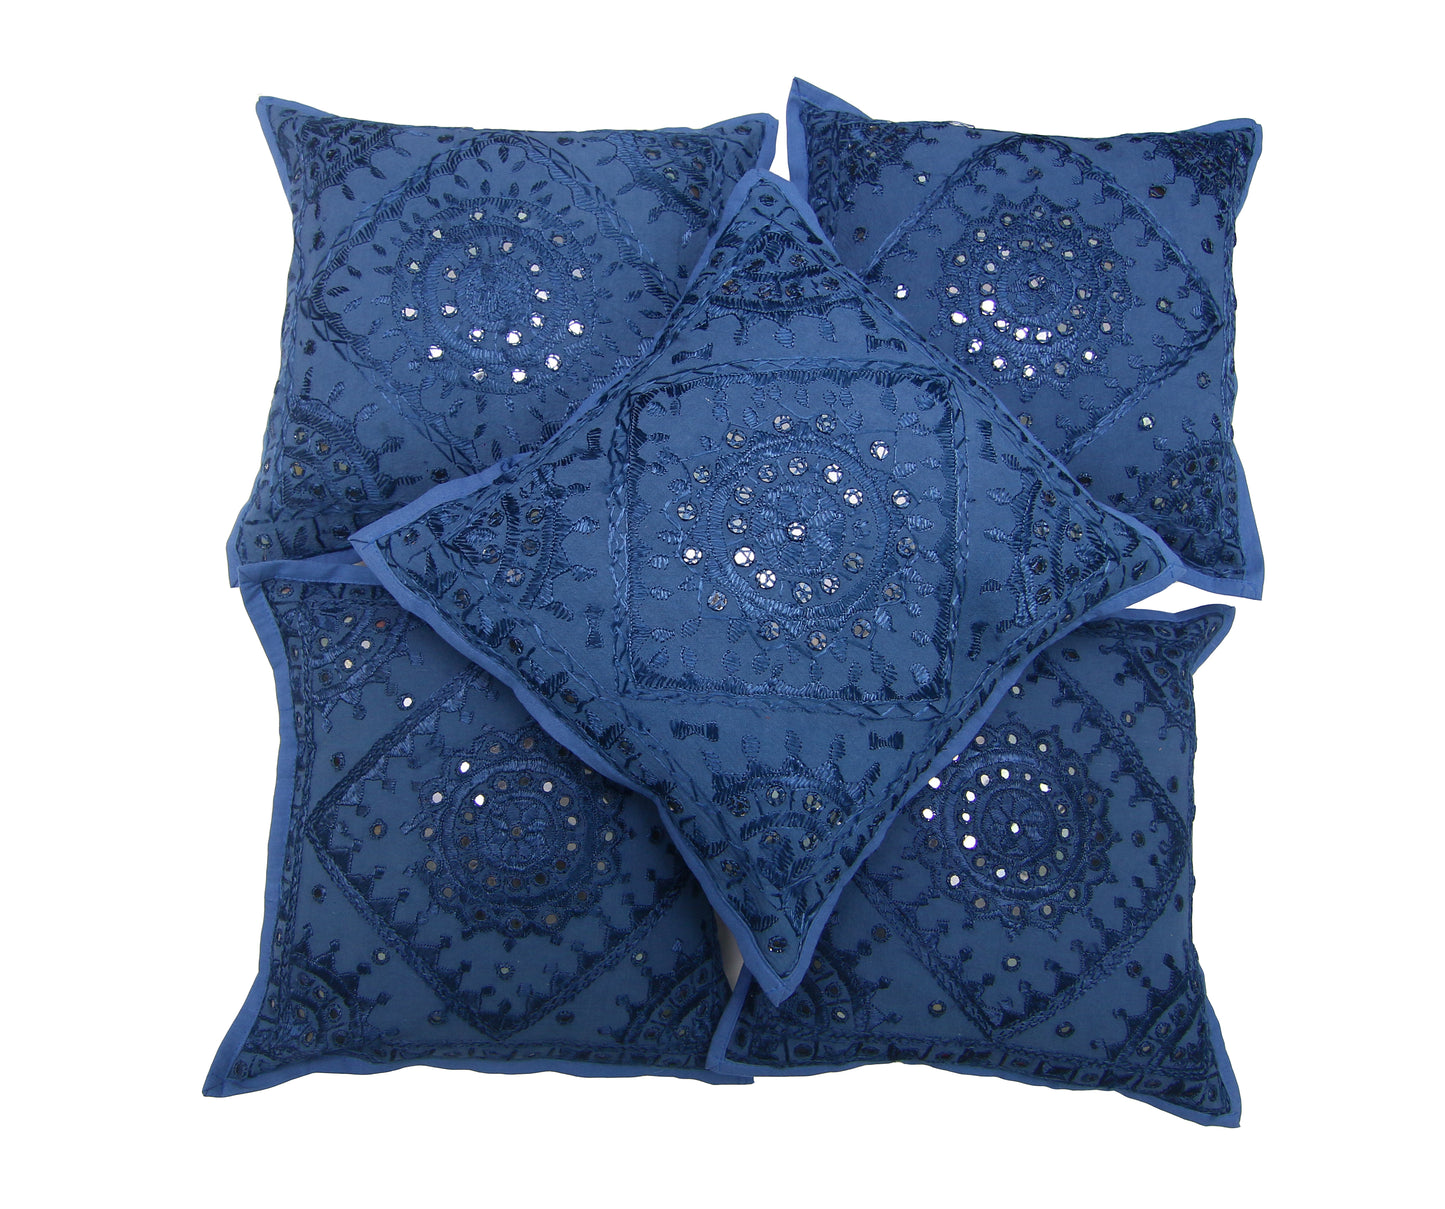 Mirror Work Cushion Cover - Set of 5